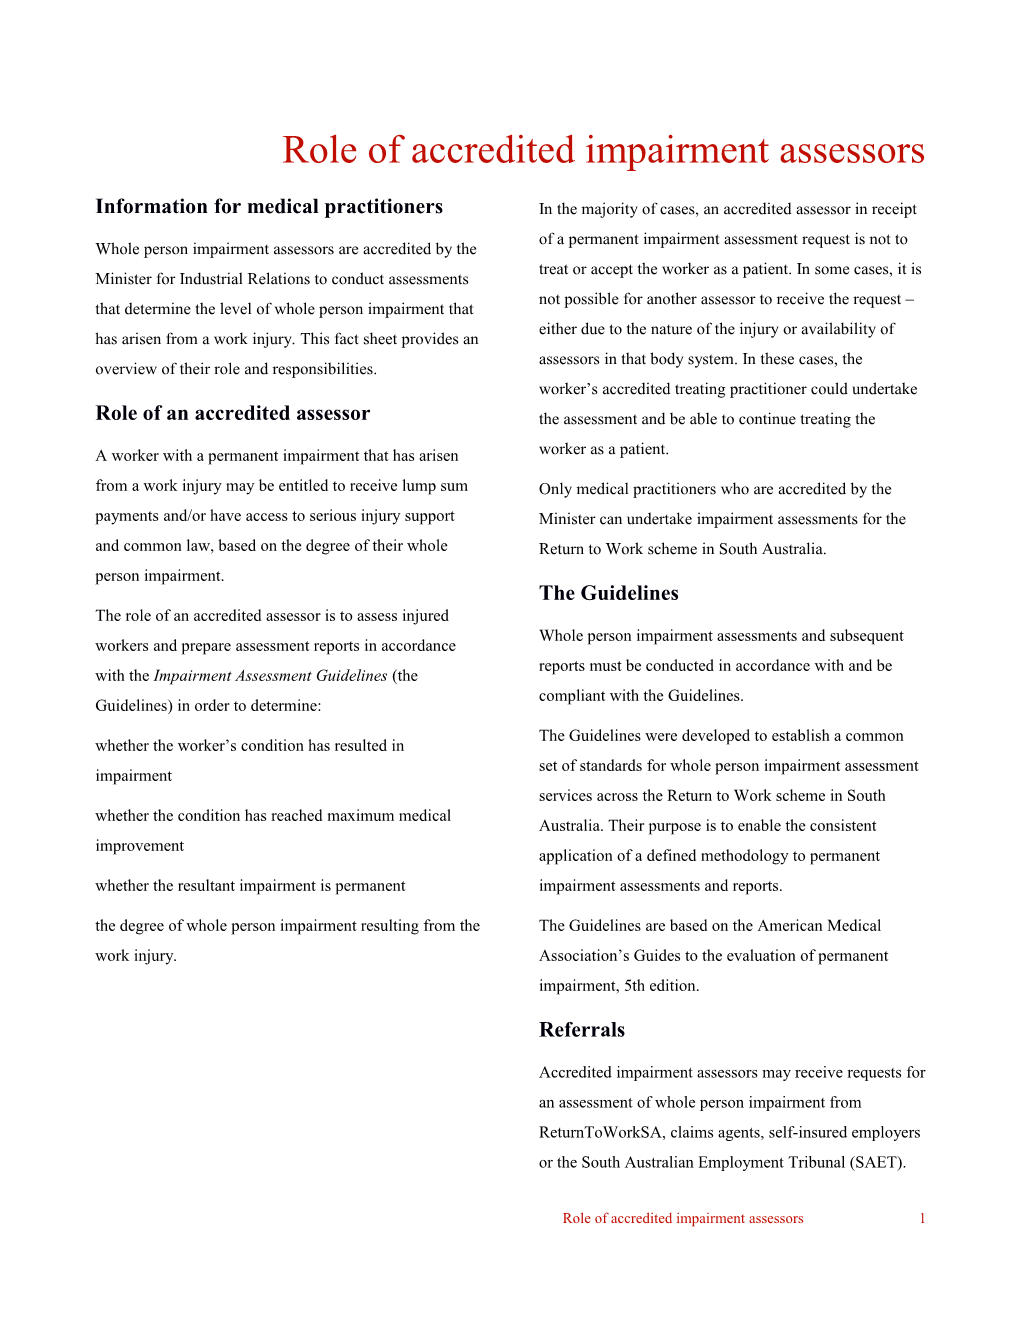 Role of Accredited Impairment Assessors